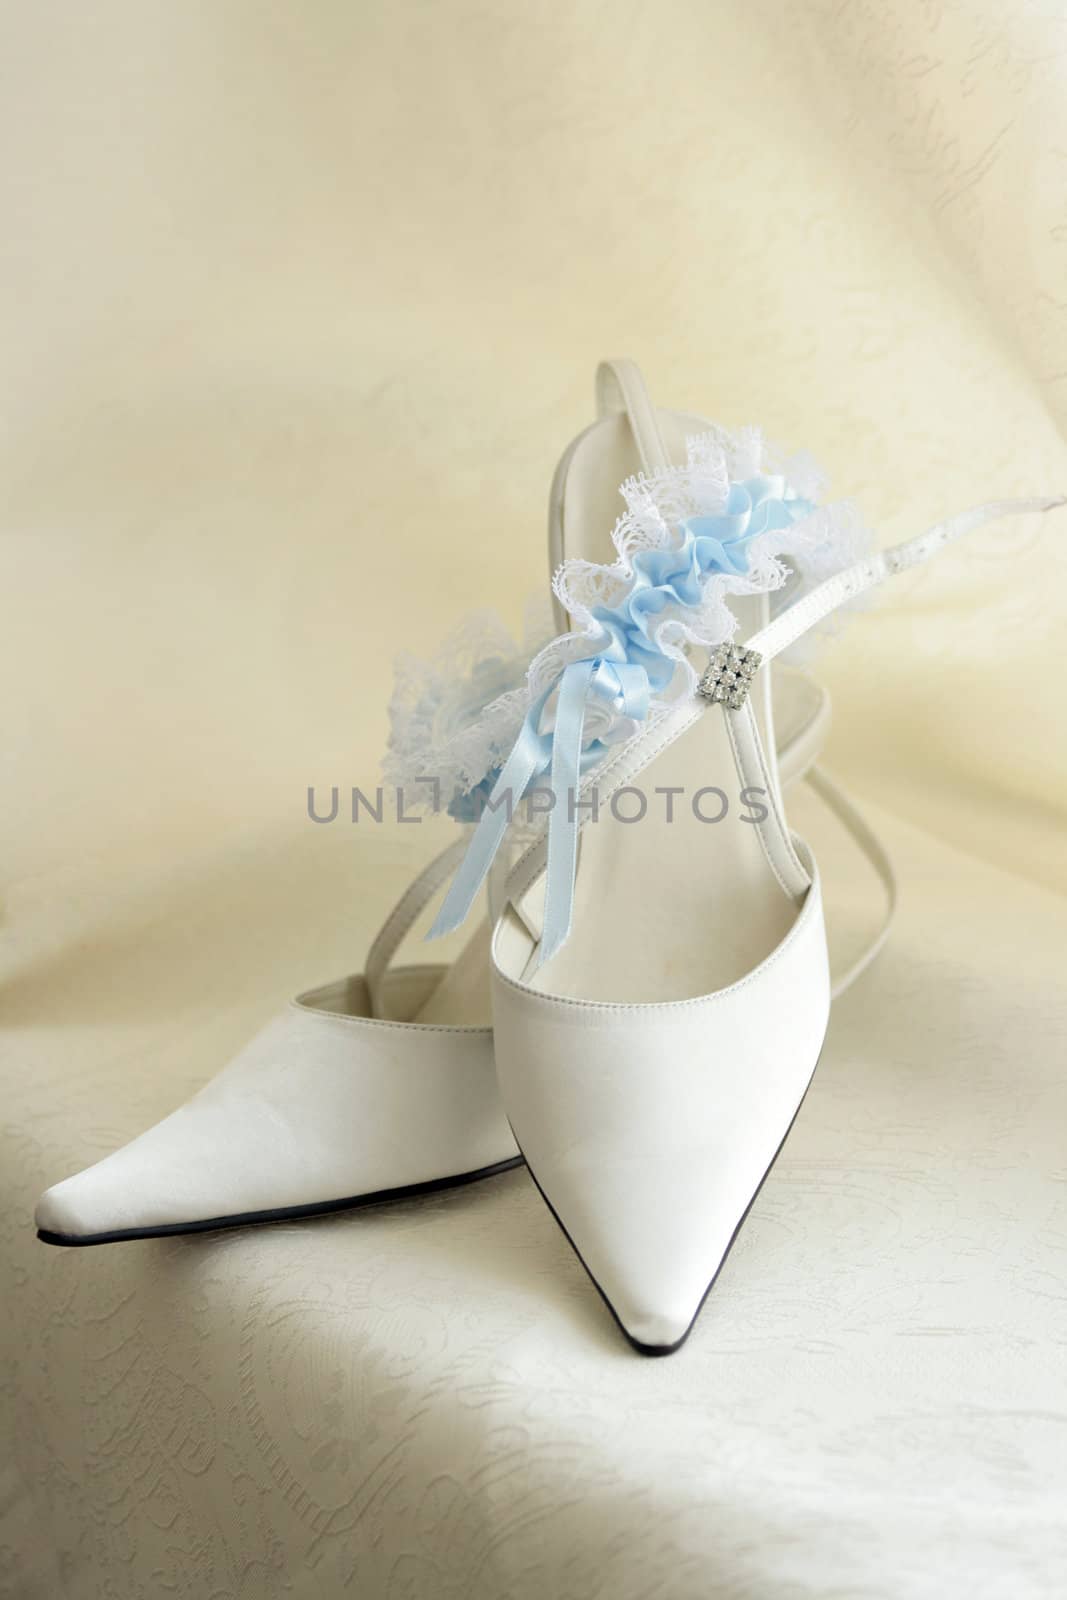 brides shoes and garter